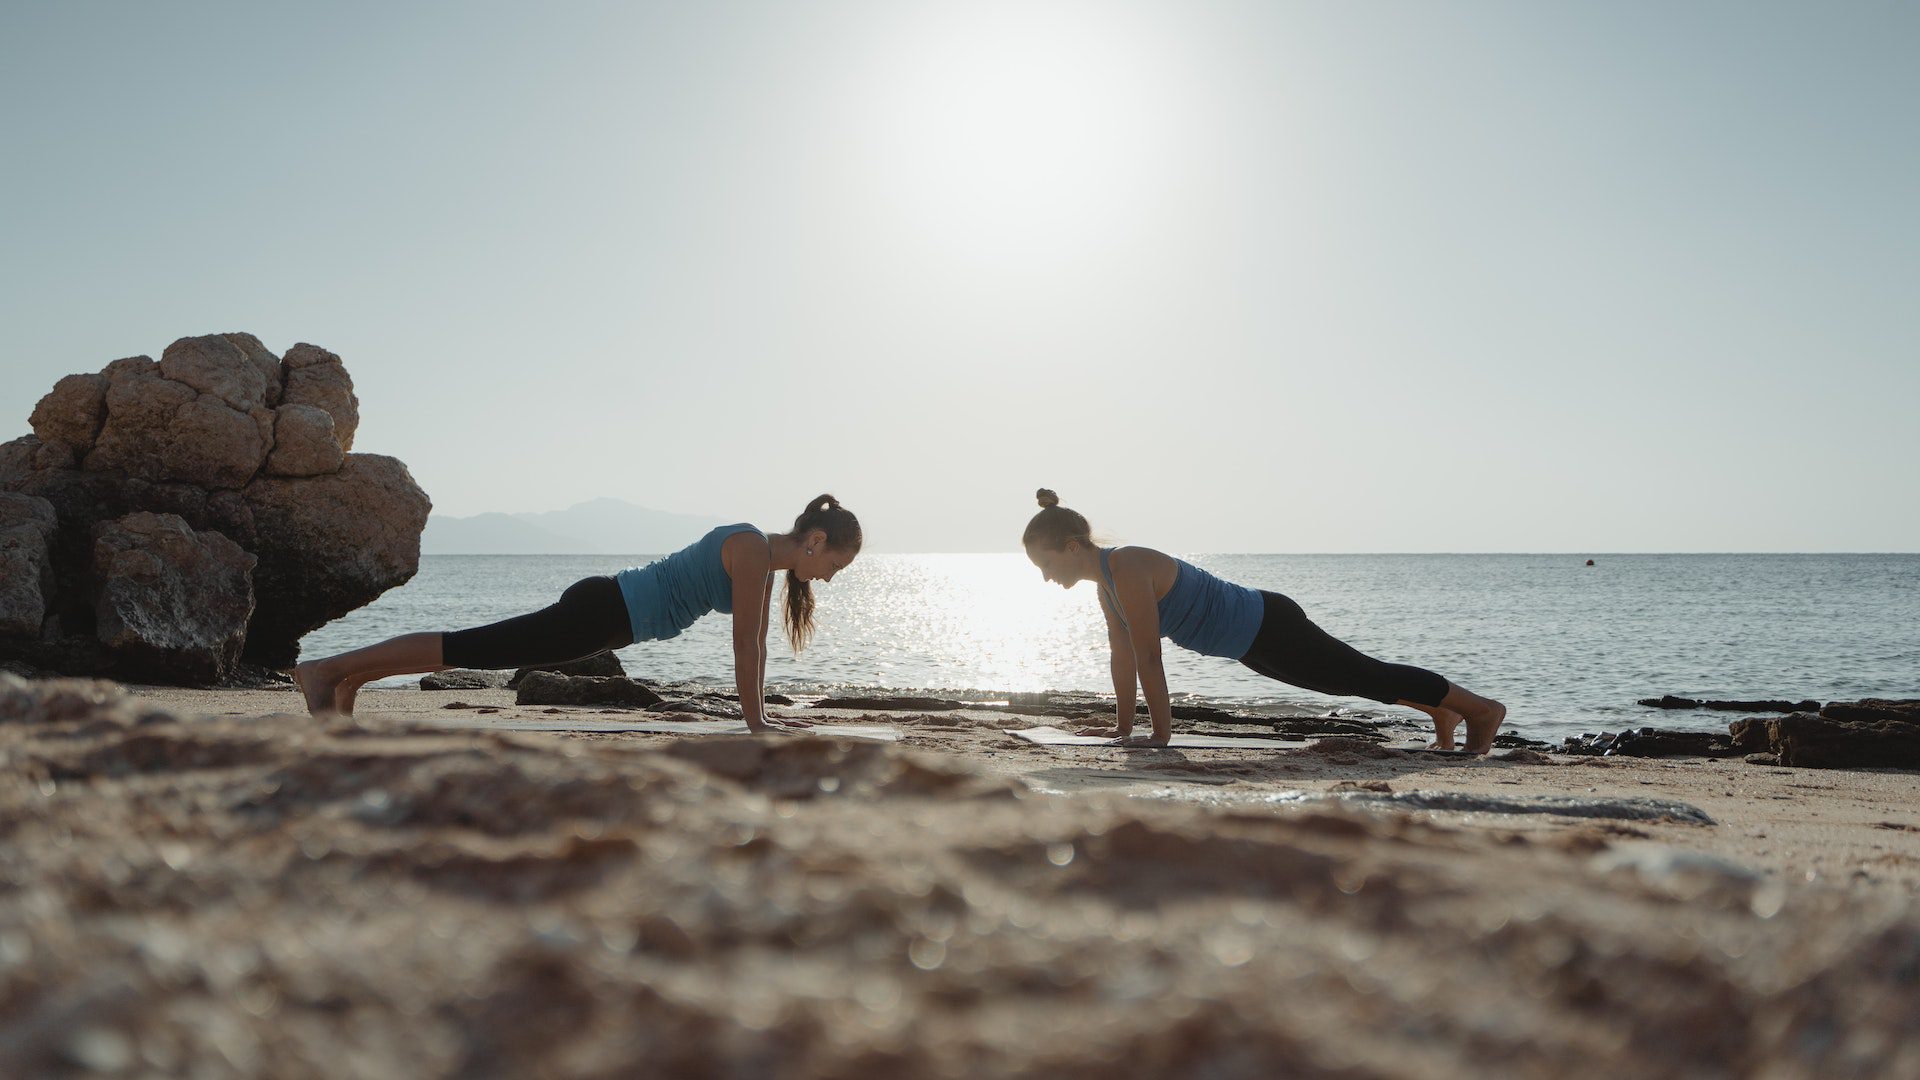 Beach Fitness Activities for a Fun and Active Vacation